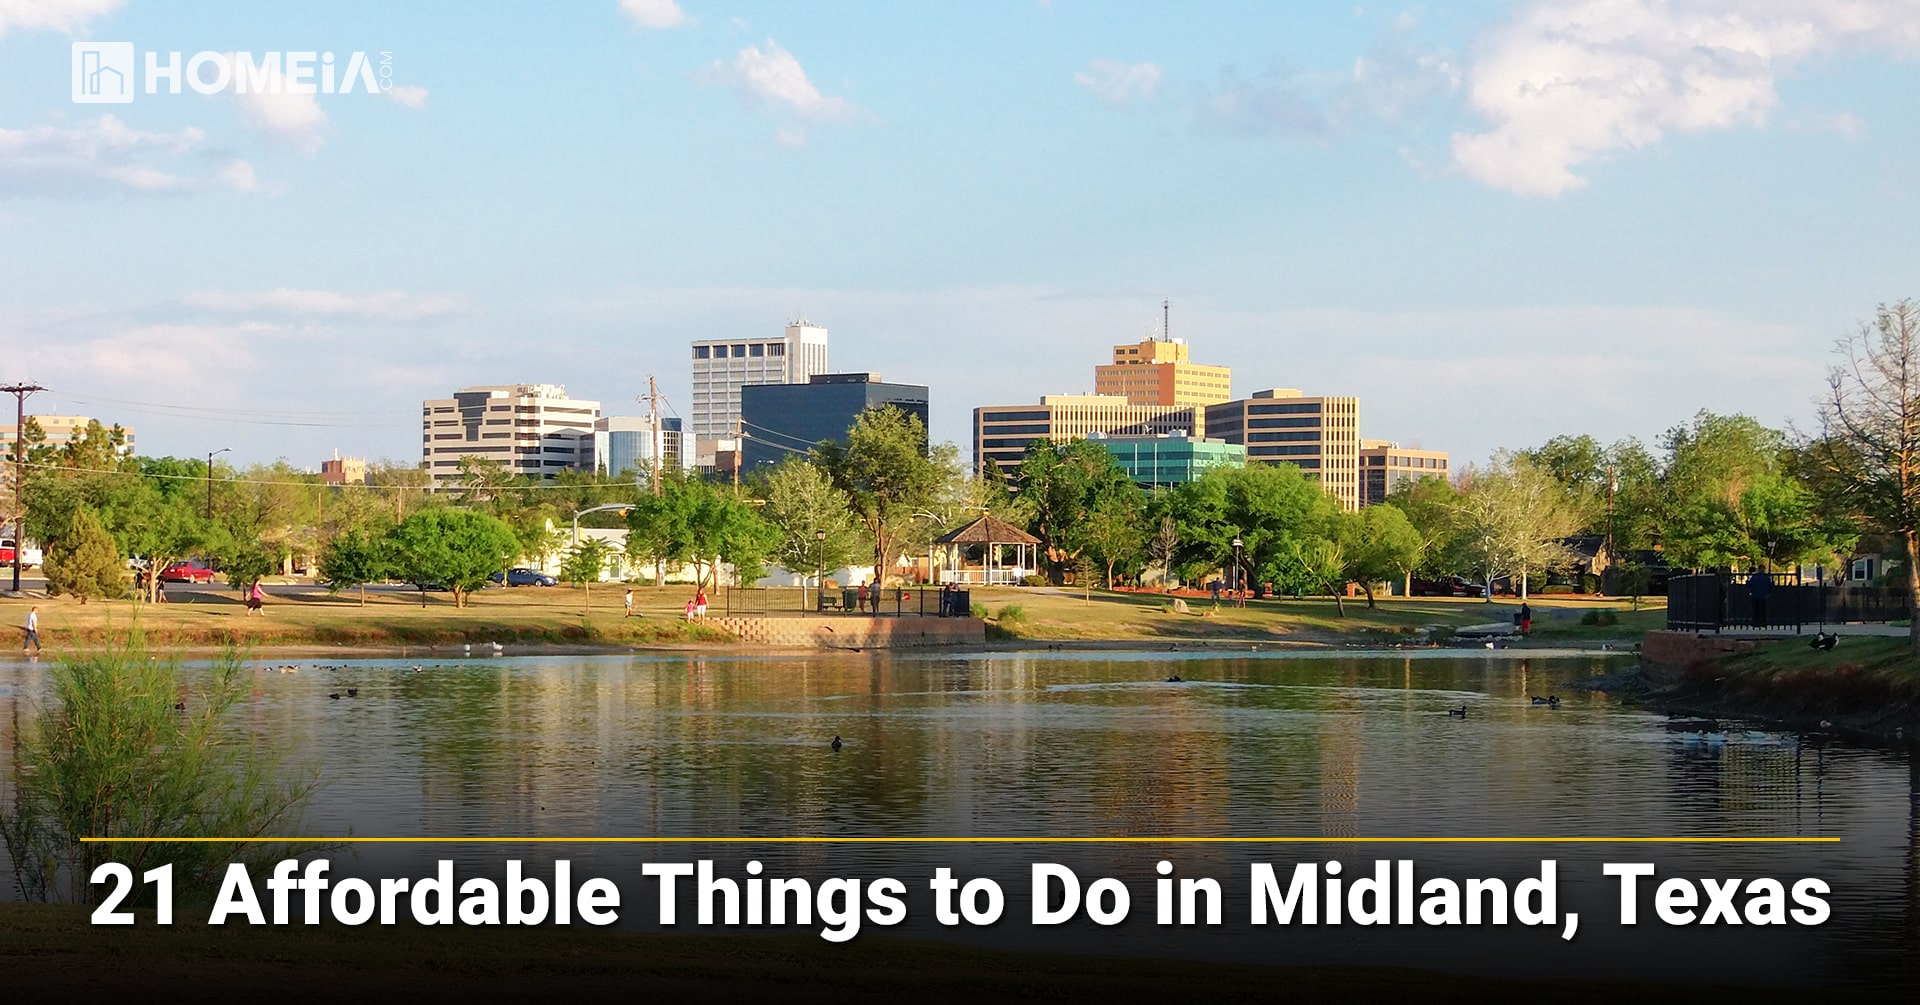 21 Affordable Things to Do in Midland, Texas